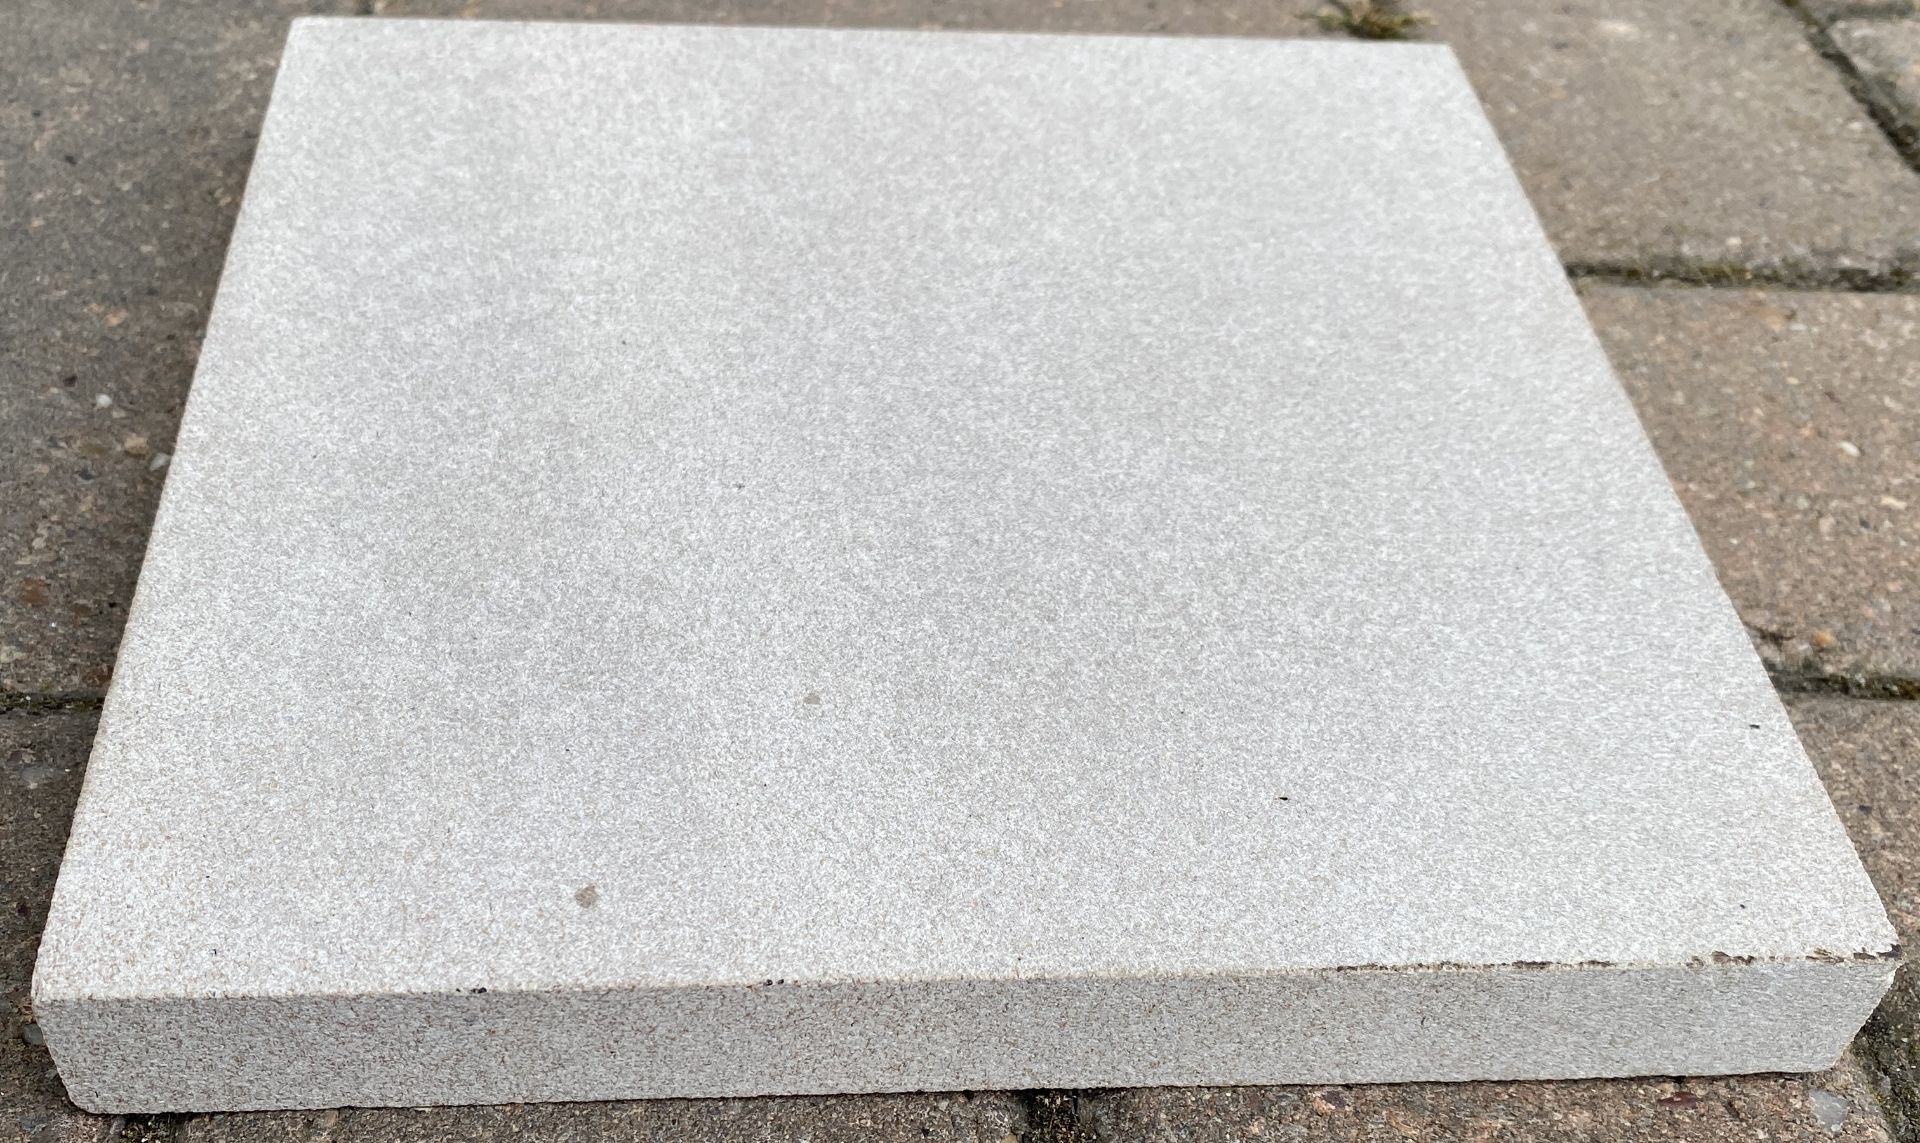 Contents to 3 pallets of BLOCKSTONE MOUSELOW NATURAL SANDSTONE, RUBBED FINISH FACING/PATIO STONE. - Image 5 of 8